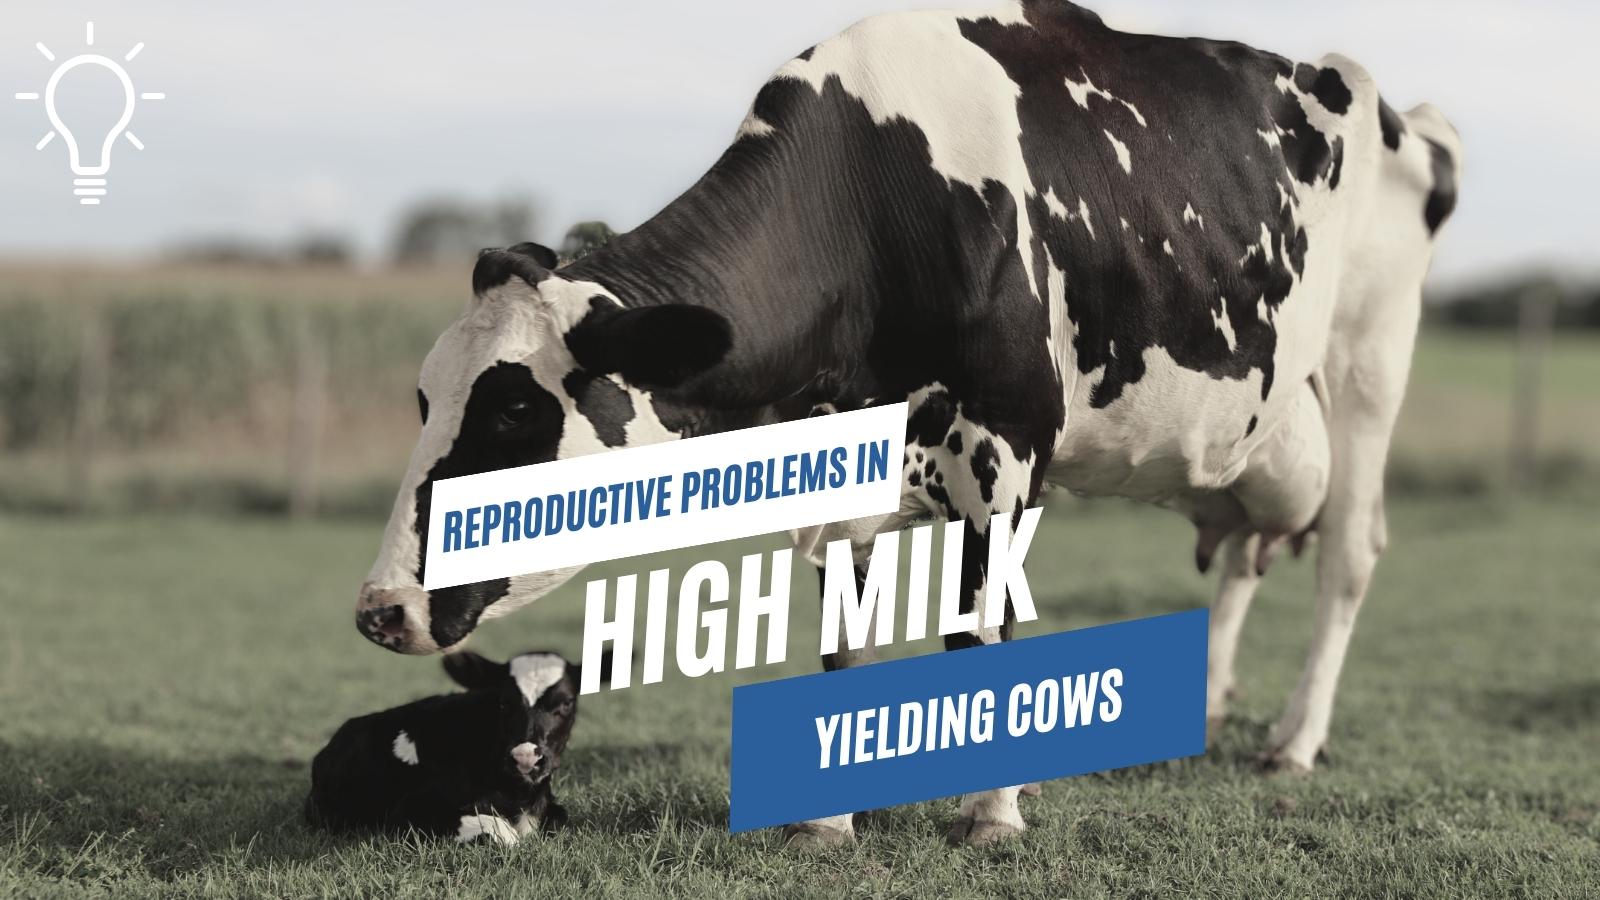 Reproductive Problems in High Milk-Yielding Cows